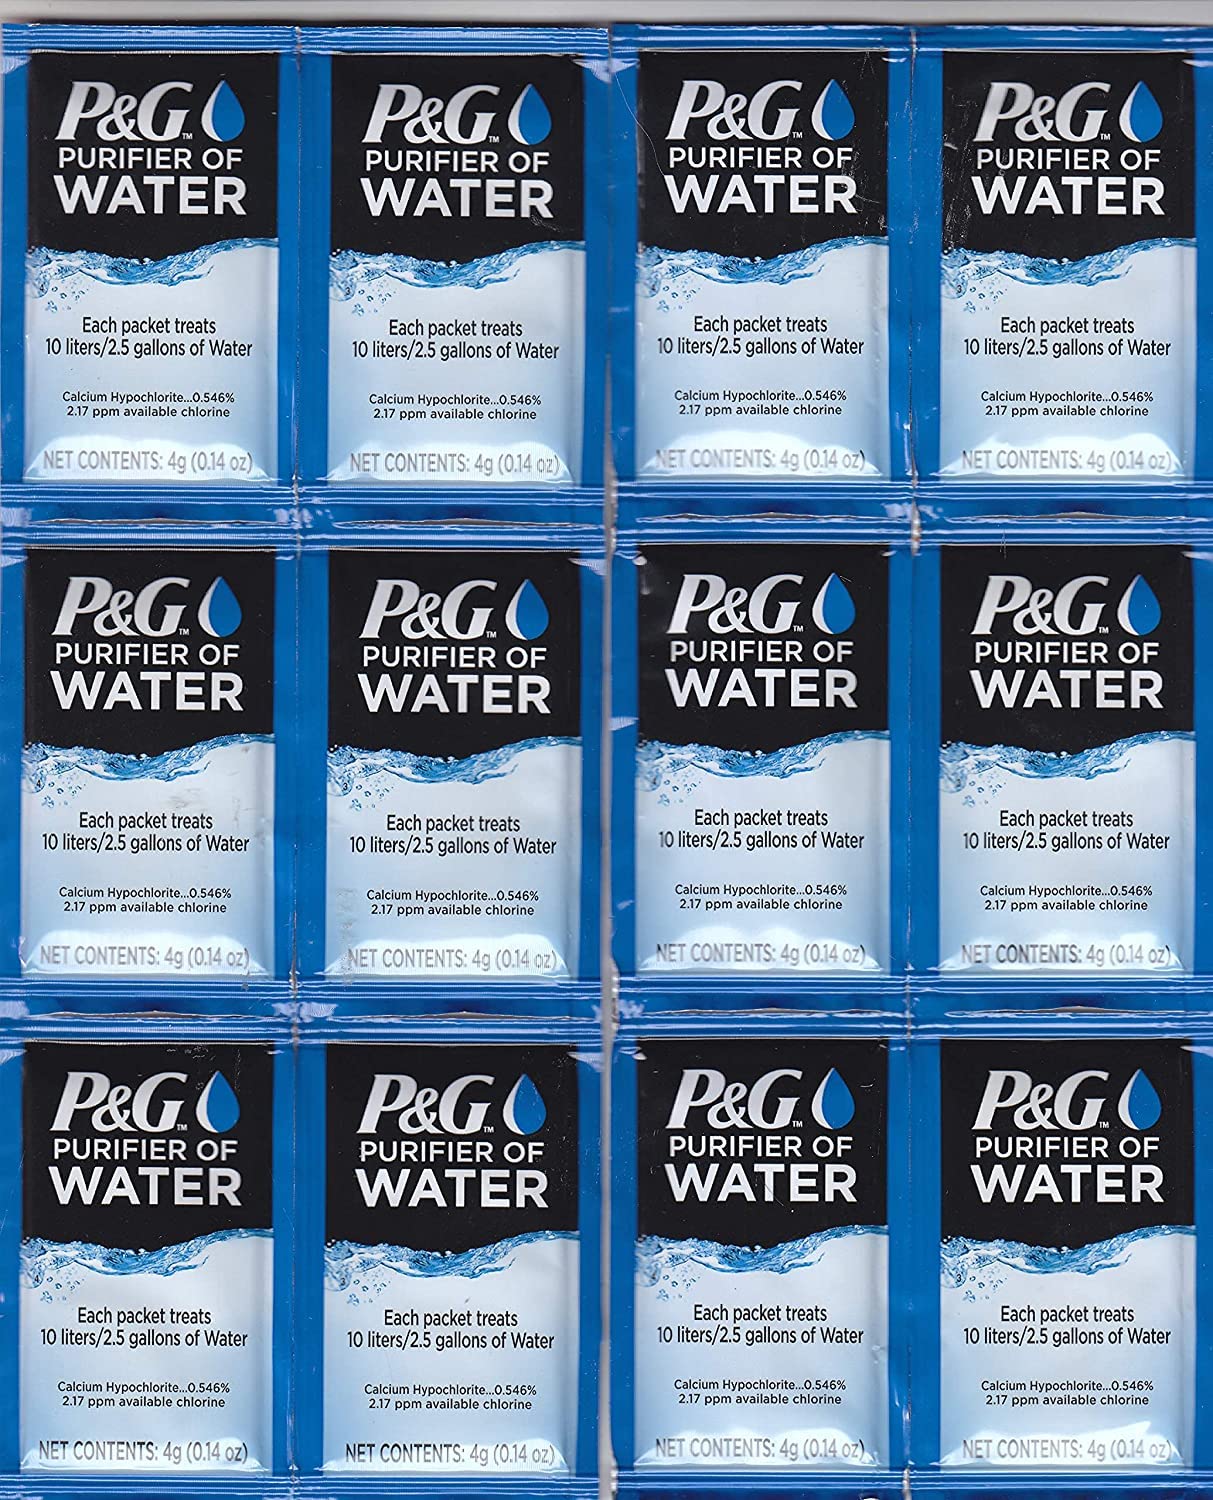 P&G Purifier of Water Portable Water Purifier Packets. [...]